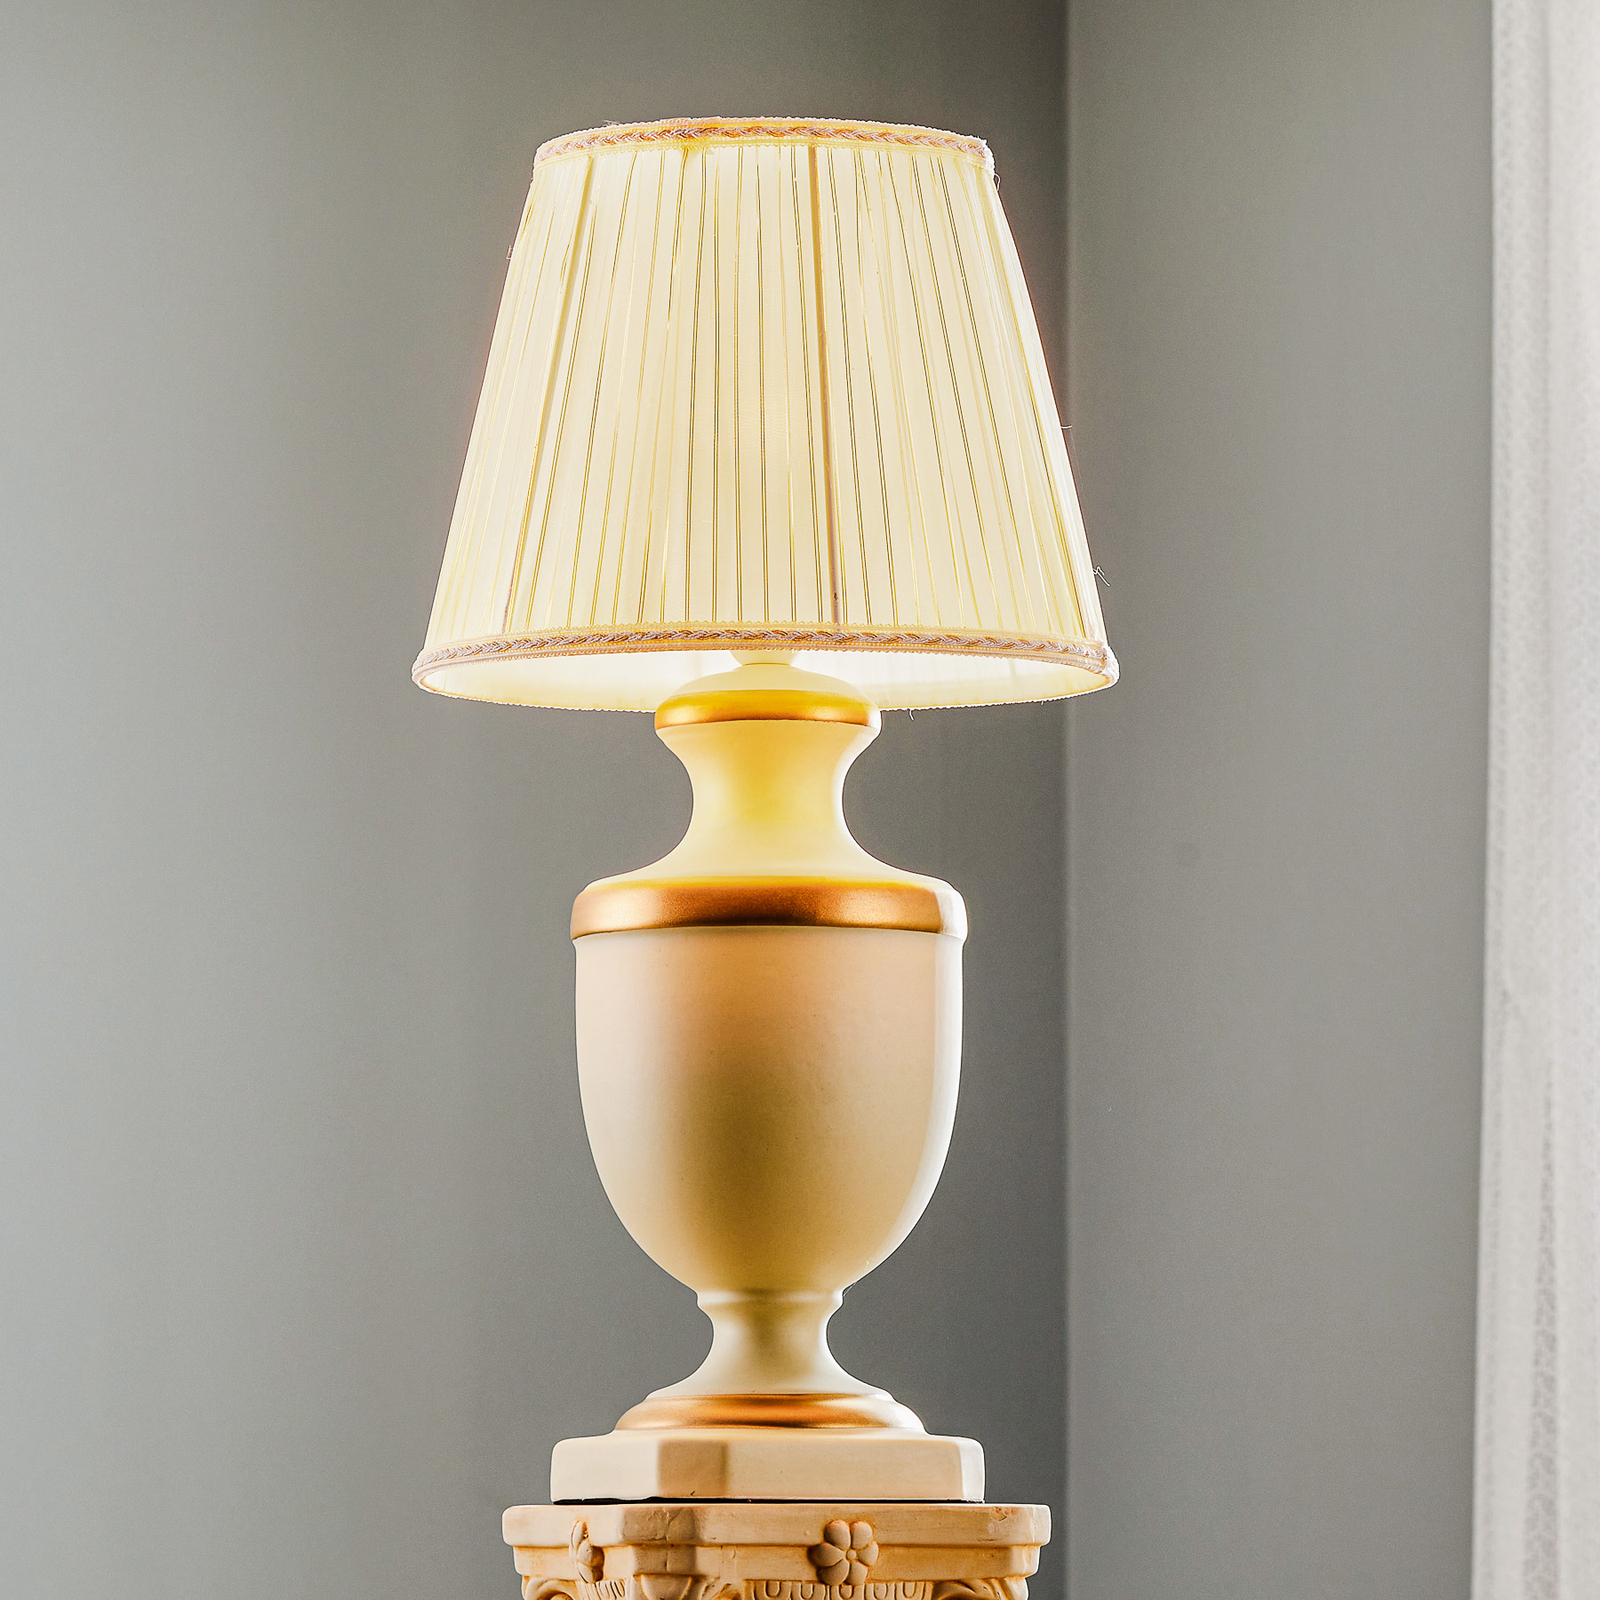 Imperiale table lamp made of ceramics height 56 cm